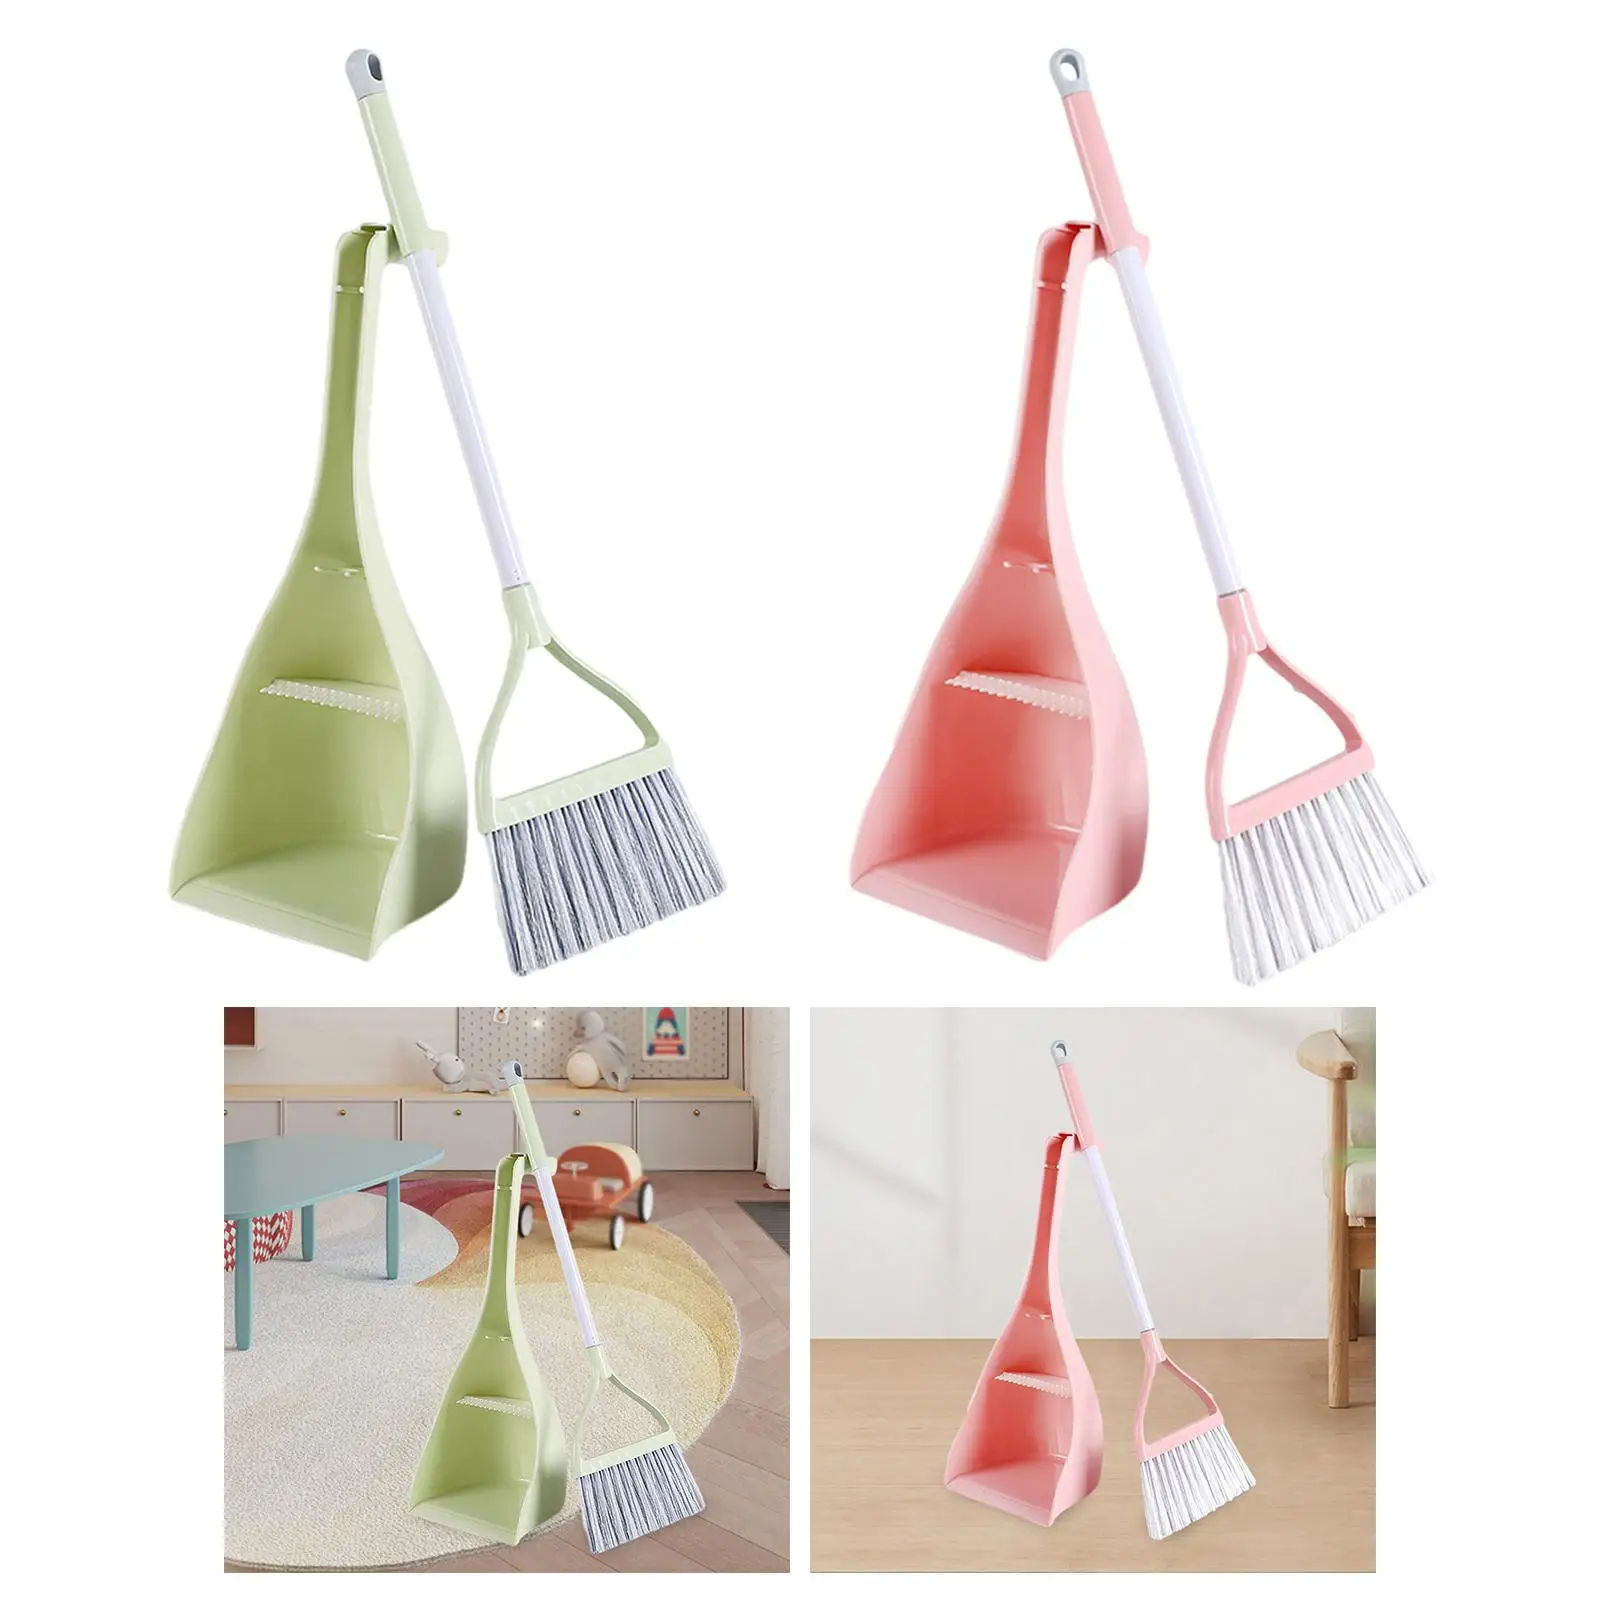 Miniature Sweeping House Tool Toy Set Develop Life Skills Holiday Gifts Housekeeping Play Set for Ages 3-6 Preschool Boys Girls